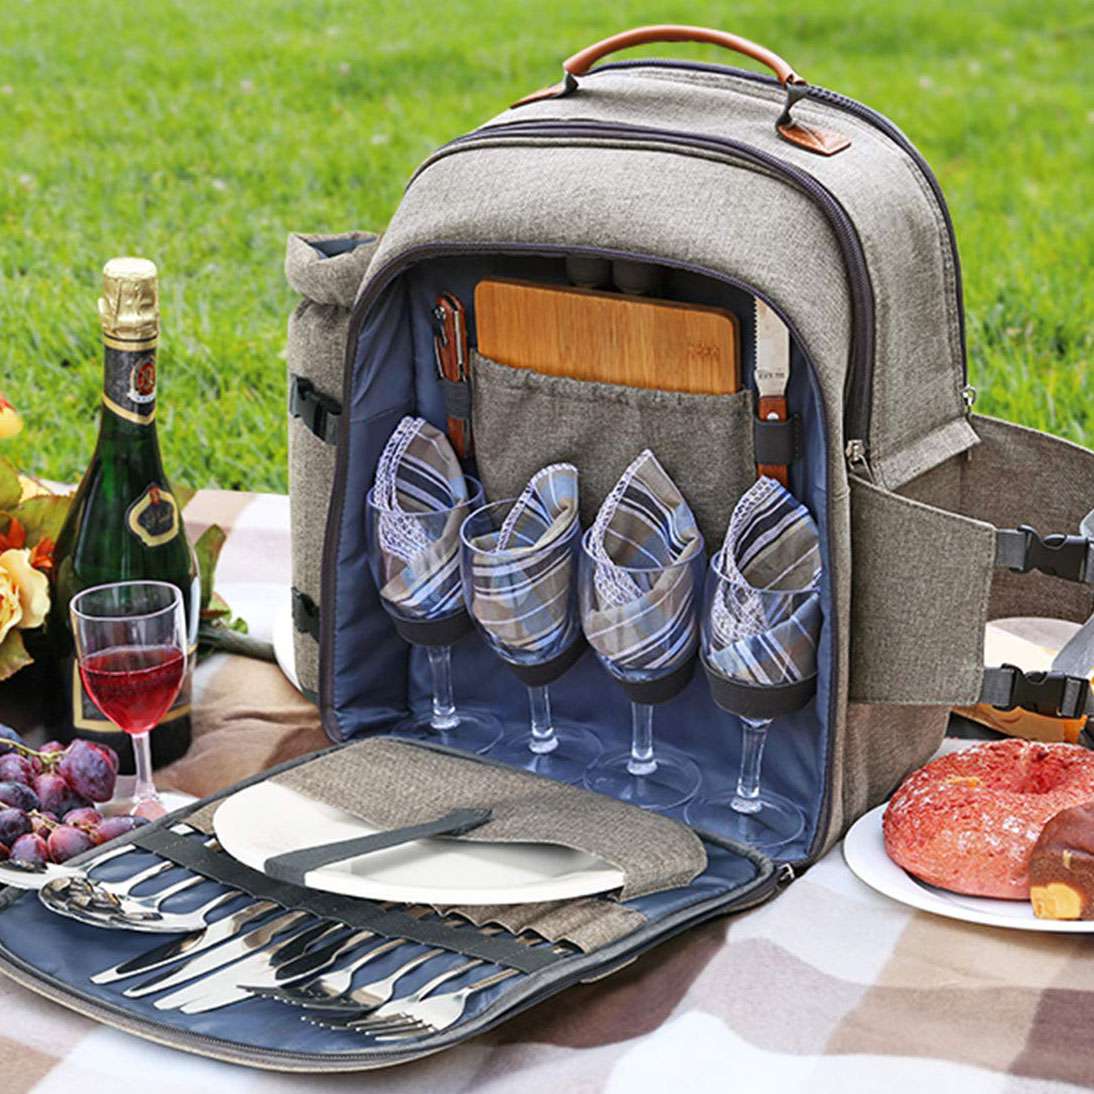 PICNIC BASKET BACKPACK ~Everything Needed for a Perfect Picnic in this Back Pack 